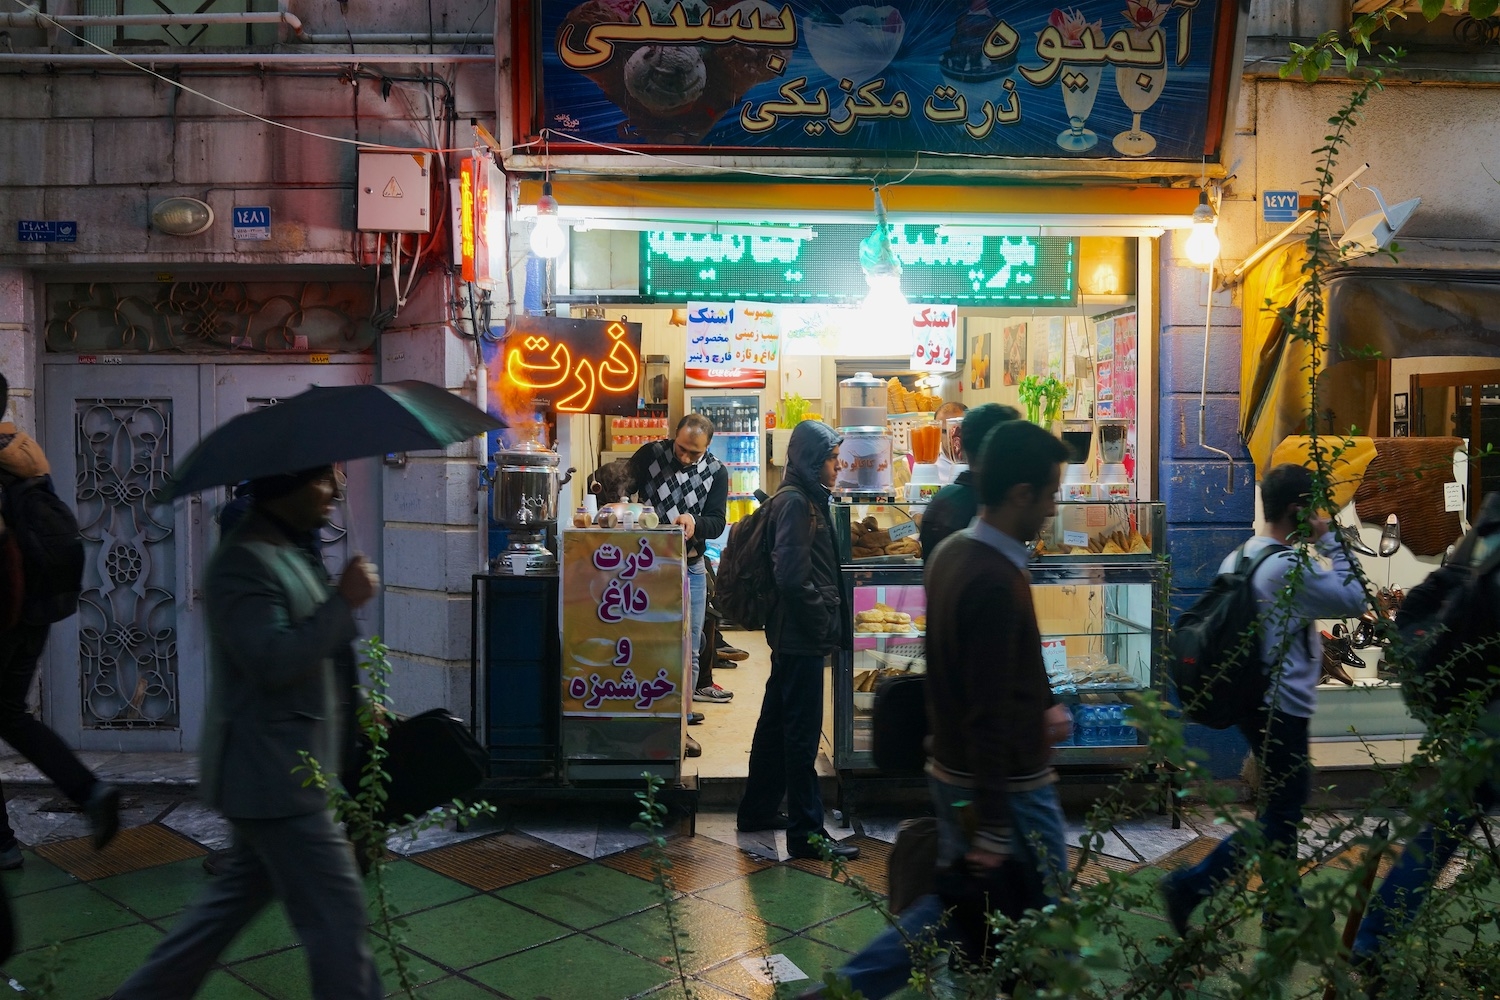 Street vendor with a neon sign that reads “corn”, a common street food in Tehran